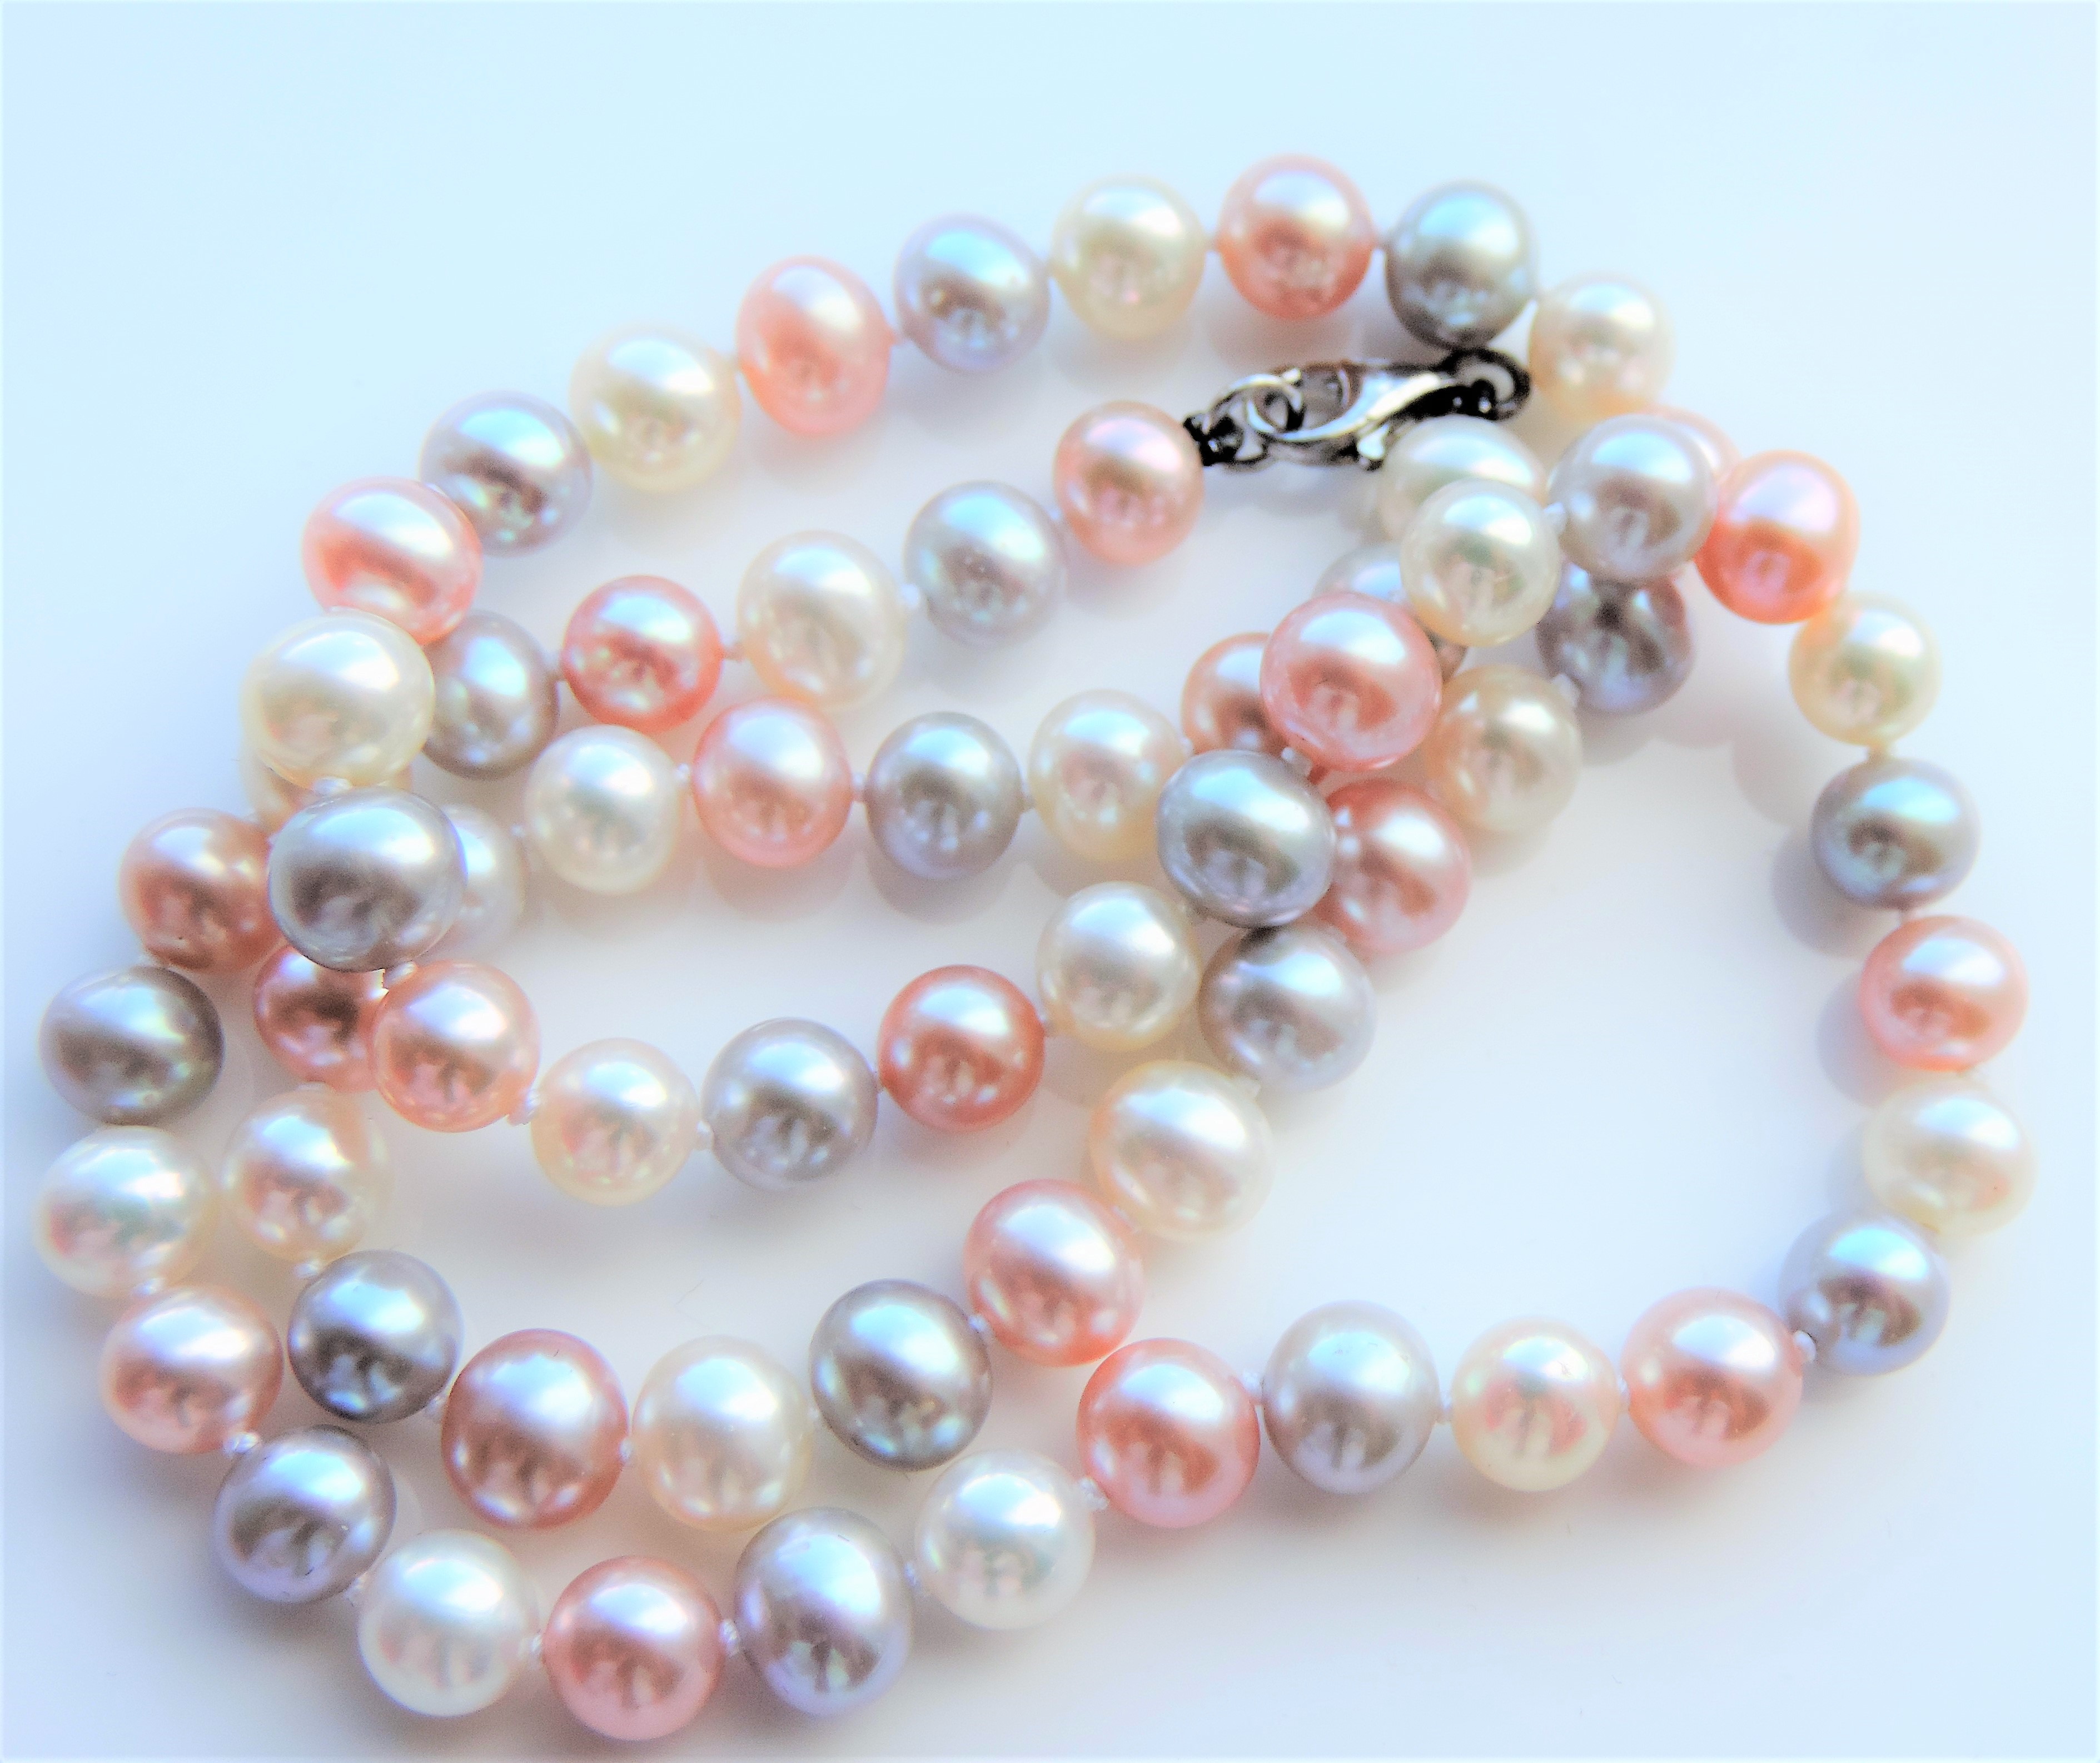 Luxury Freshwater Multicolour Cultured Pearl Necklace - Image 3 of 5